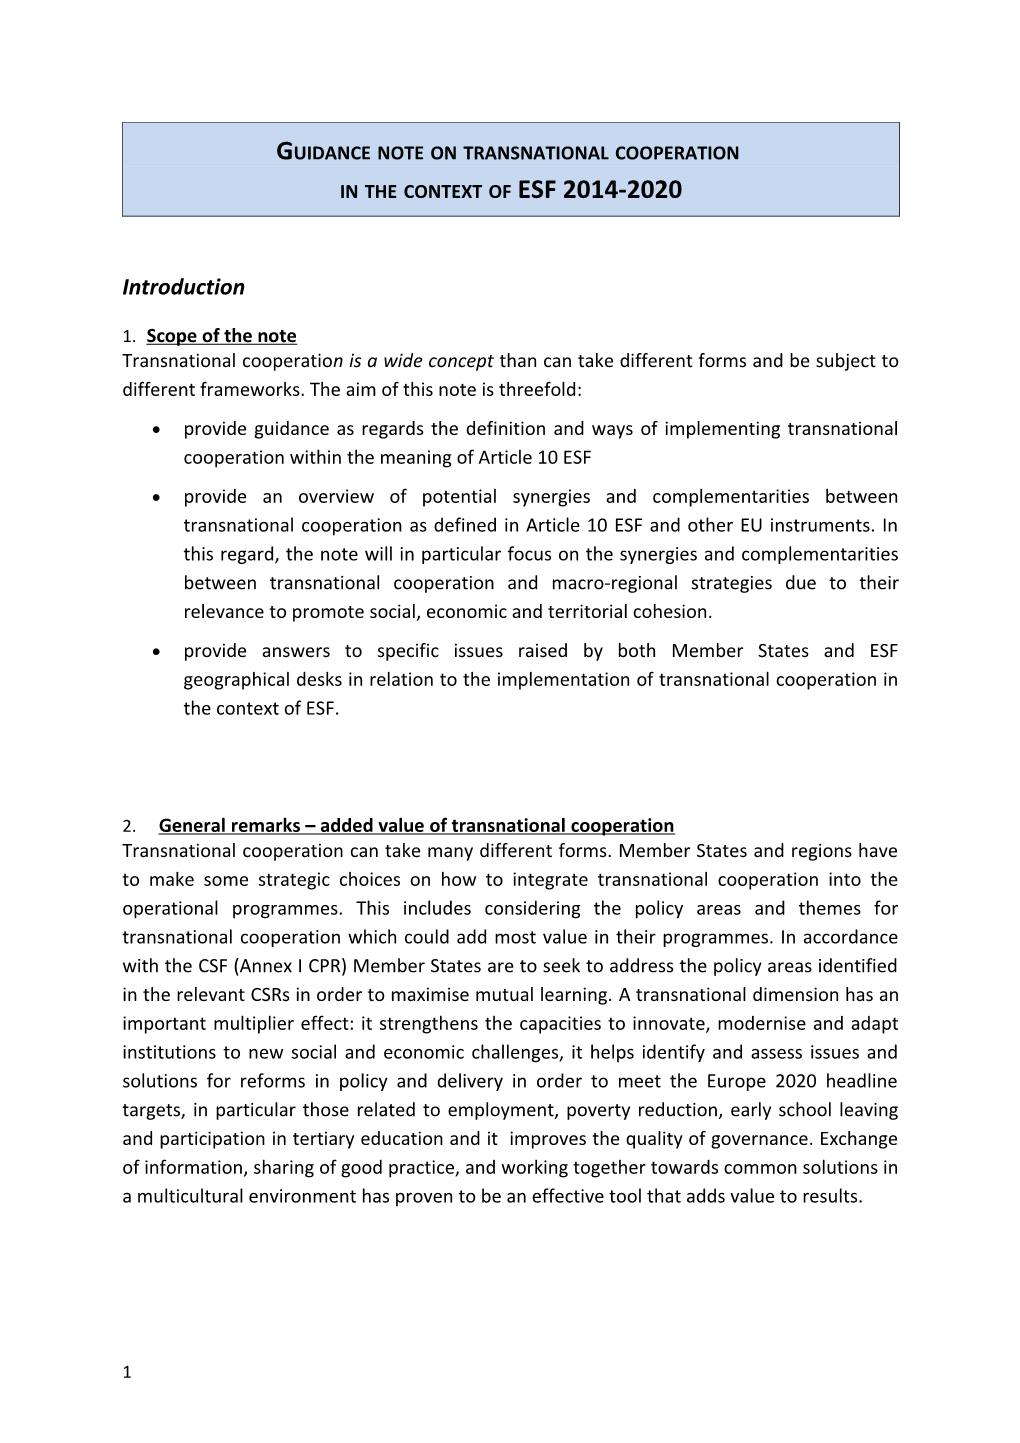 Guidance Note on Transnational Cooperation